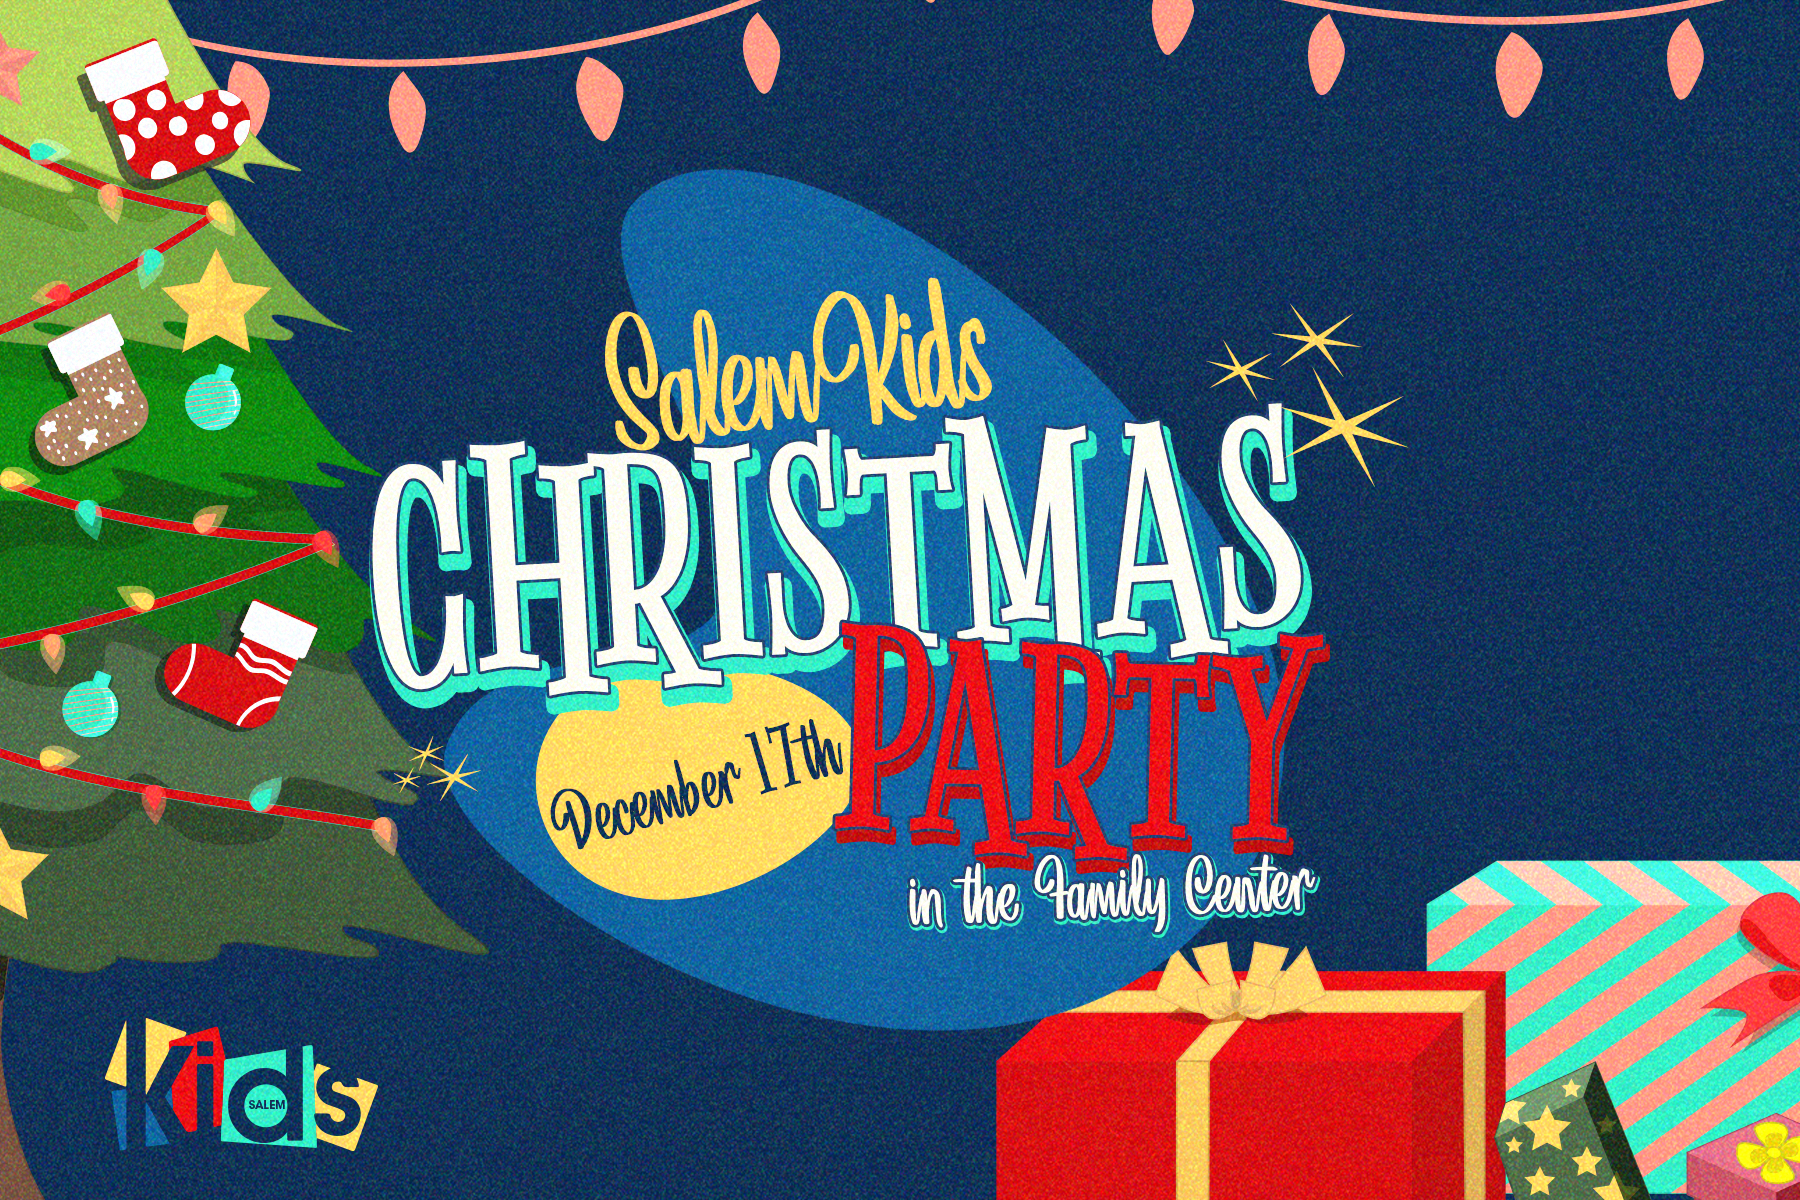 Featured image for “SalemKids Christmas Party”